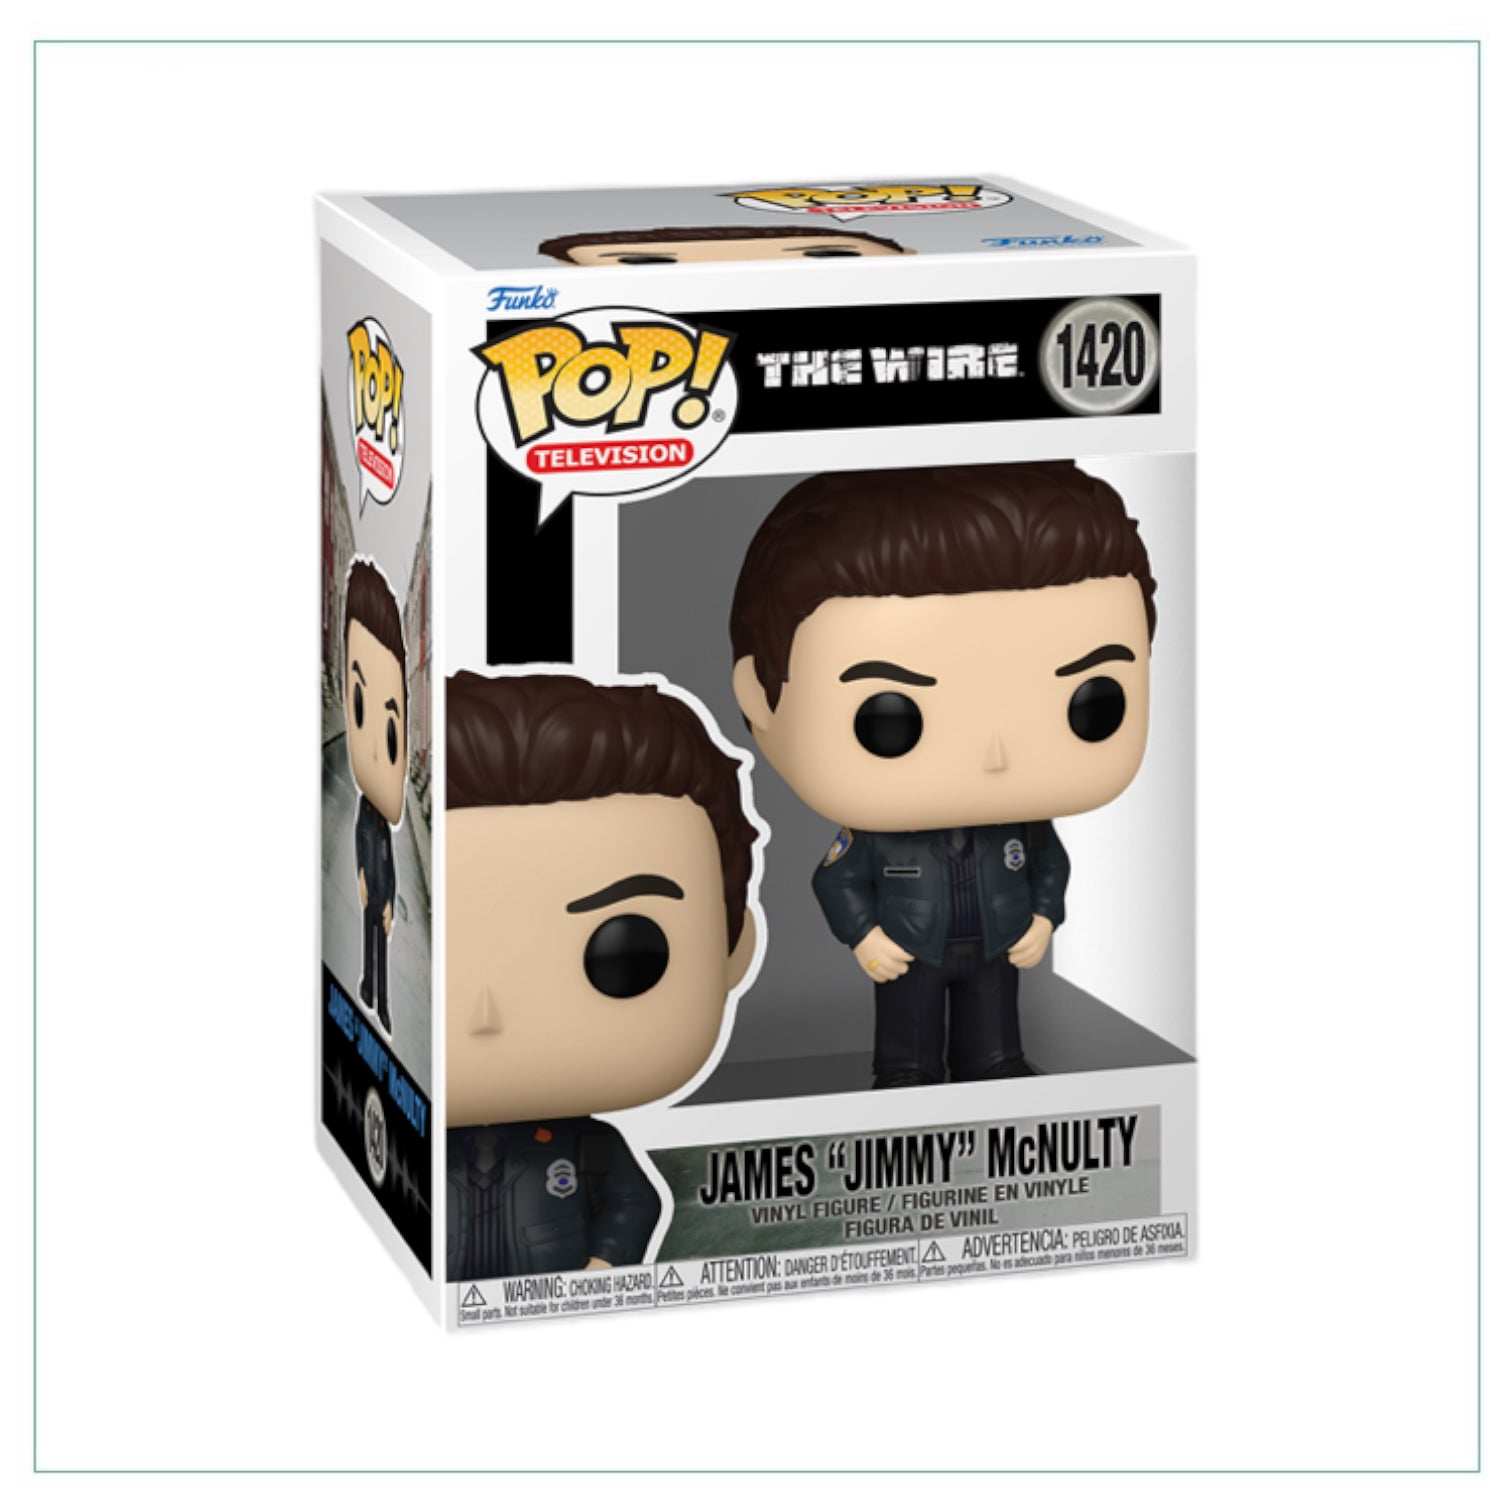 James ‘Jimmy’ Mcnulty #1420 Funko Pop! The Wire - PREORDER